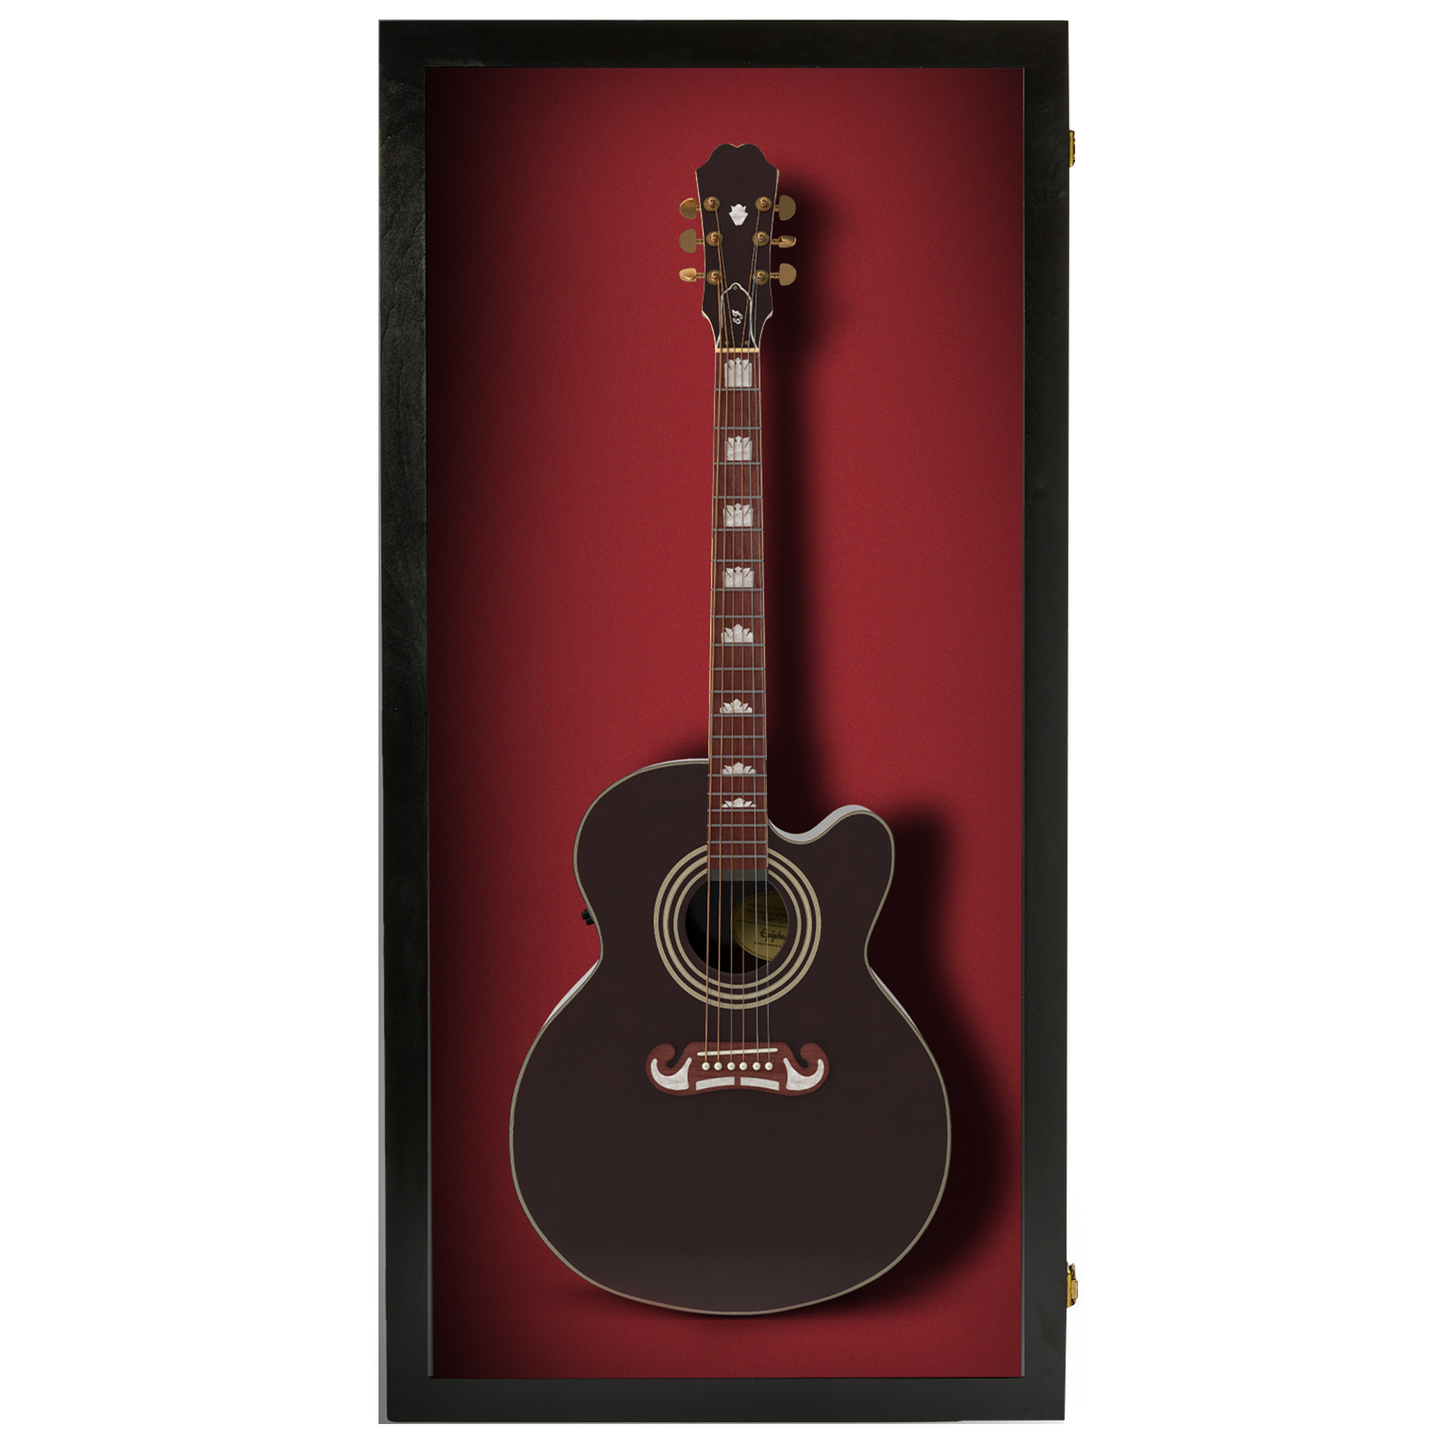 Extra Large Acoustic Guitar Case